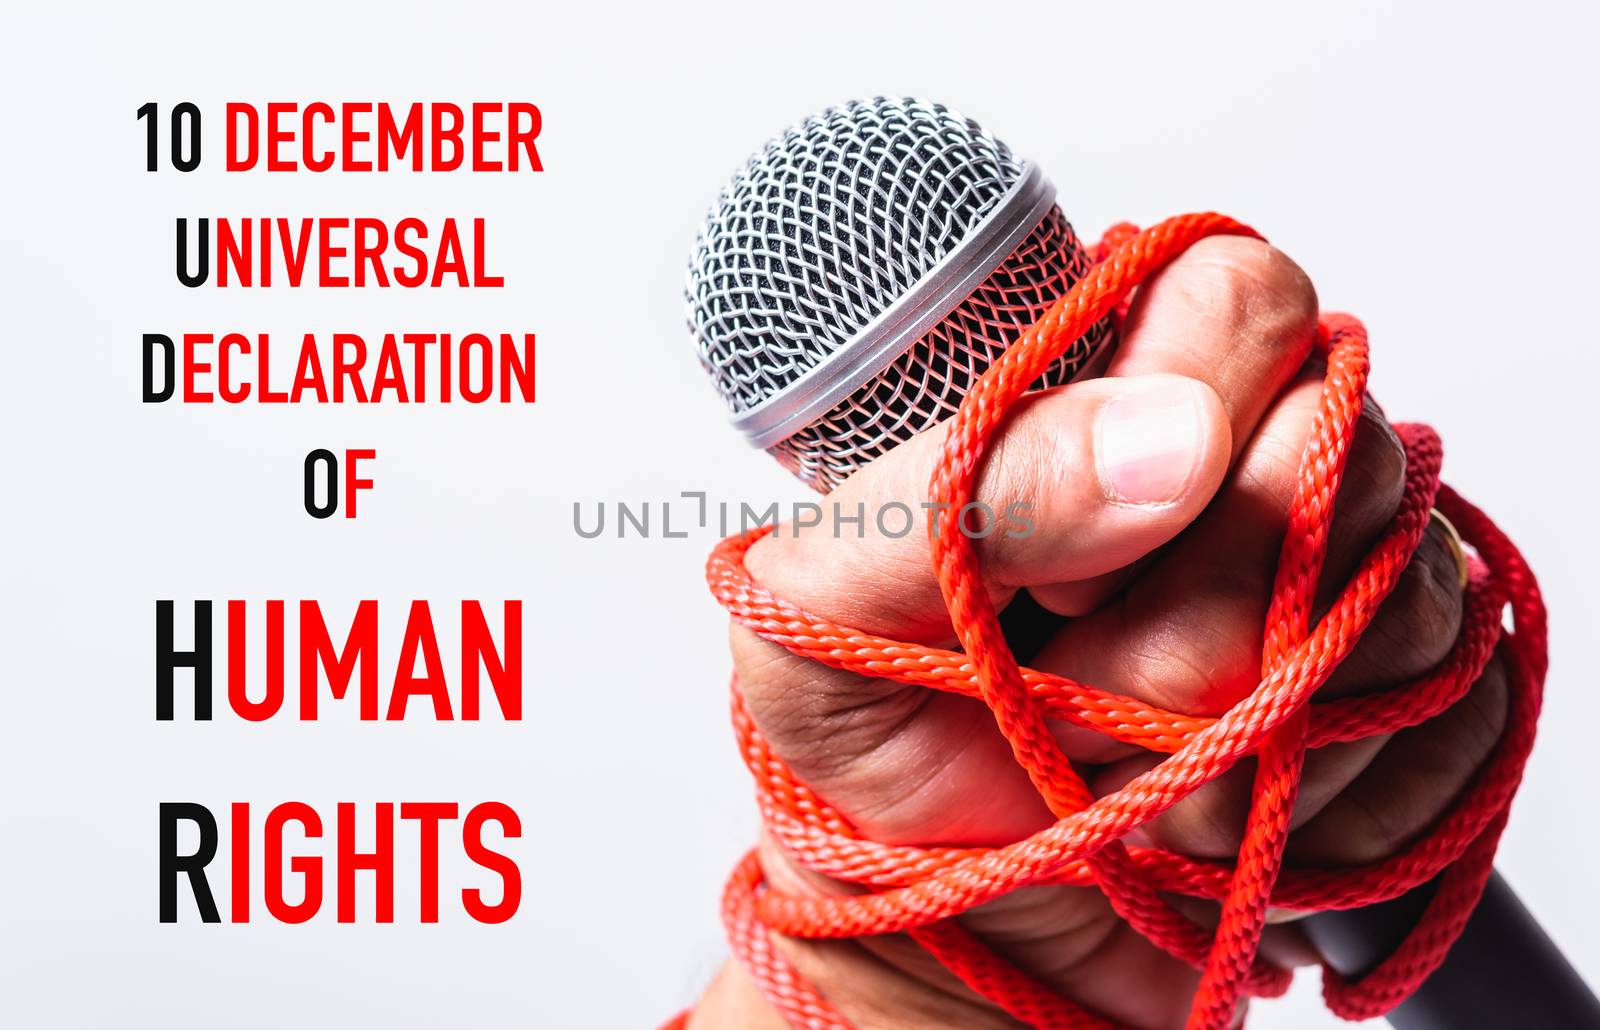 Hand holding microphone and have roped on fist hand with 10 december universal declaration of HUMAN RIGHTS text on white background, Human rights day concept